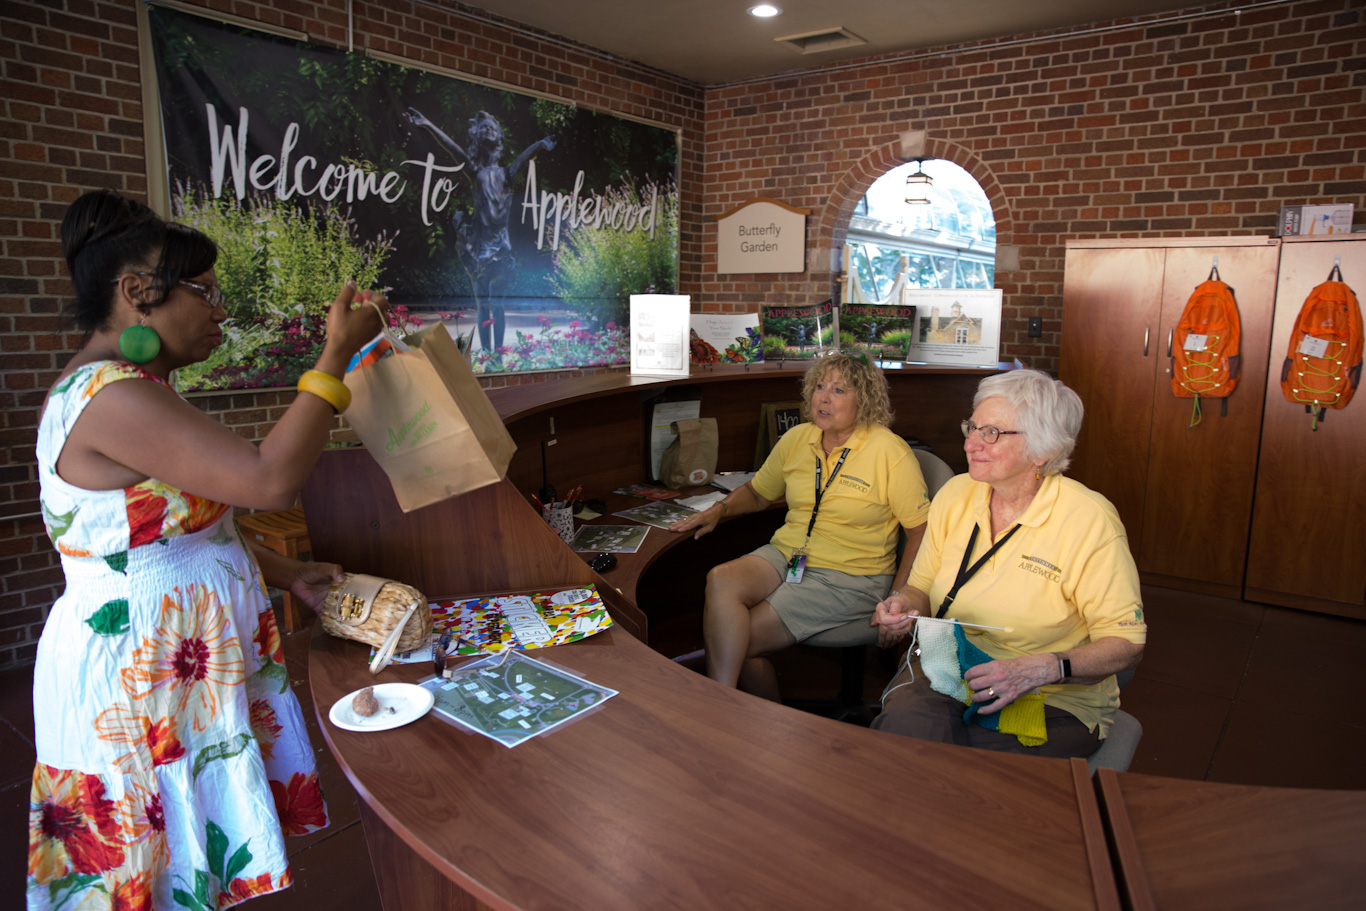 Volunteers assist a guest at the visitor services desk